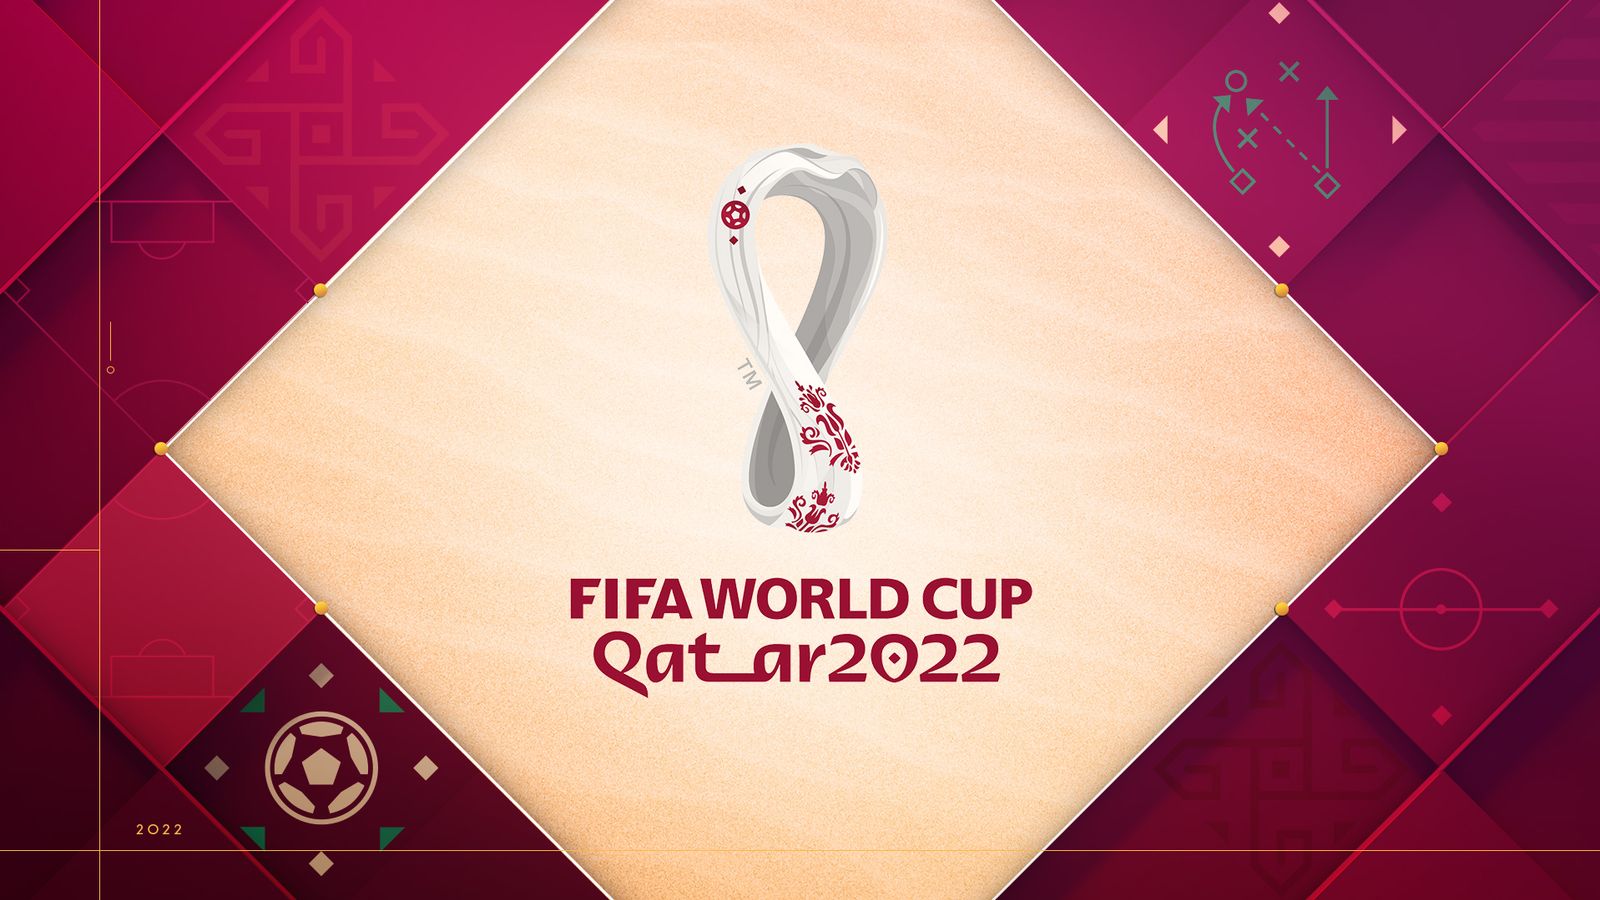 World Cup 2022: Dates, draw, schedule, kick-off times, final for Qatar tournament | Football News | Sky Sports